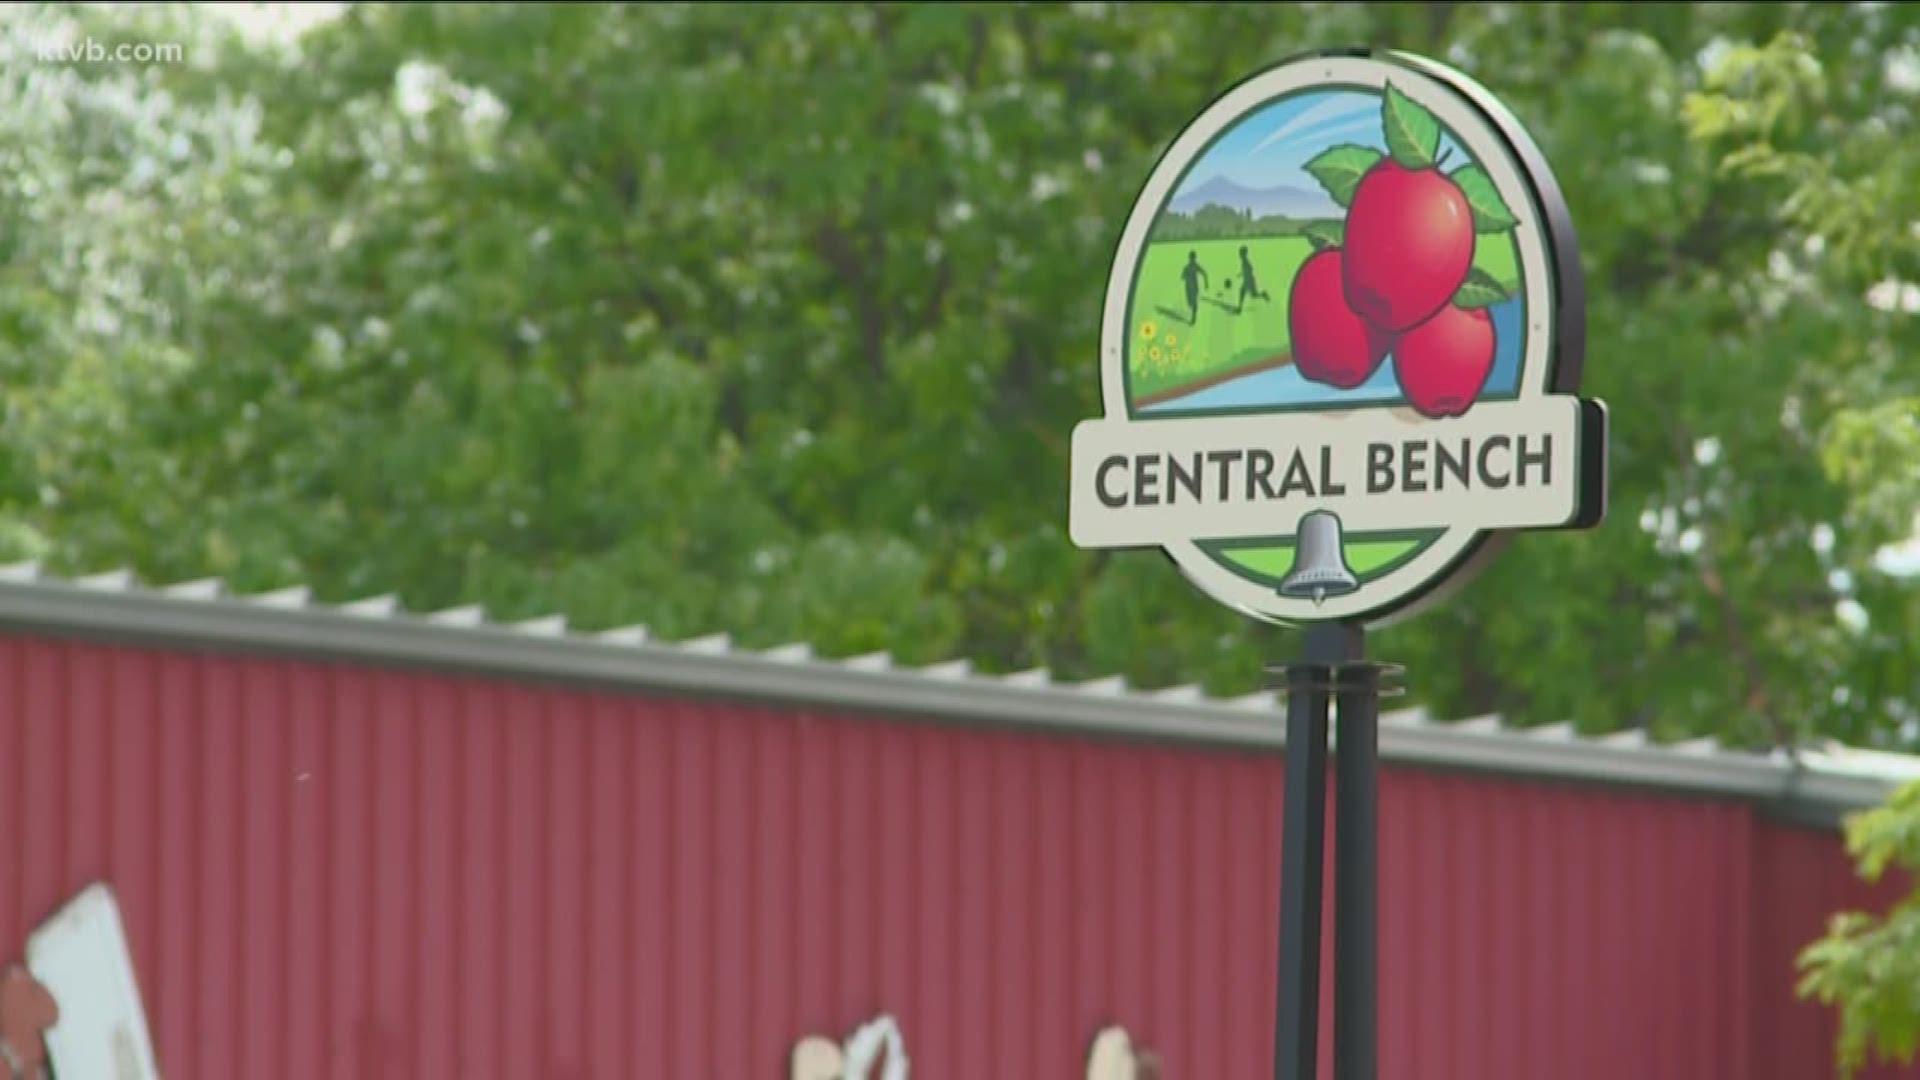 A public forum on a proposed urban renewal district in the Central Bench was held Wednesday night.